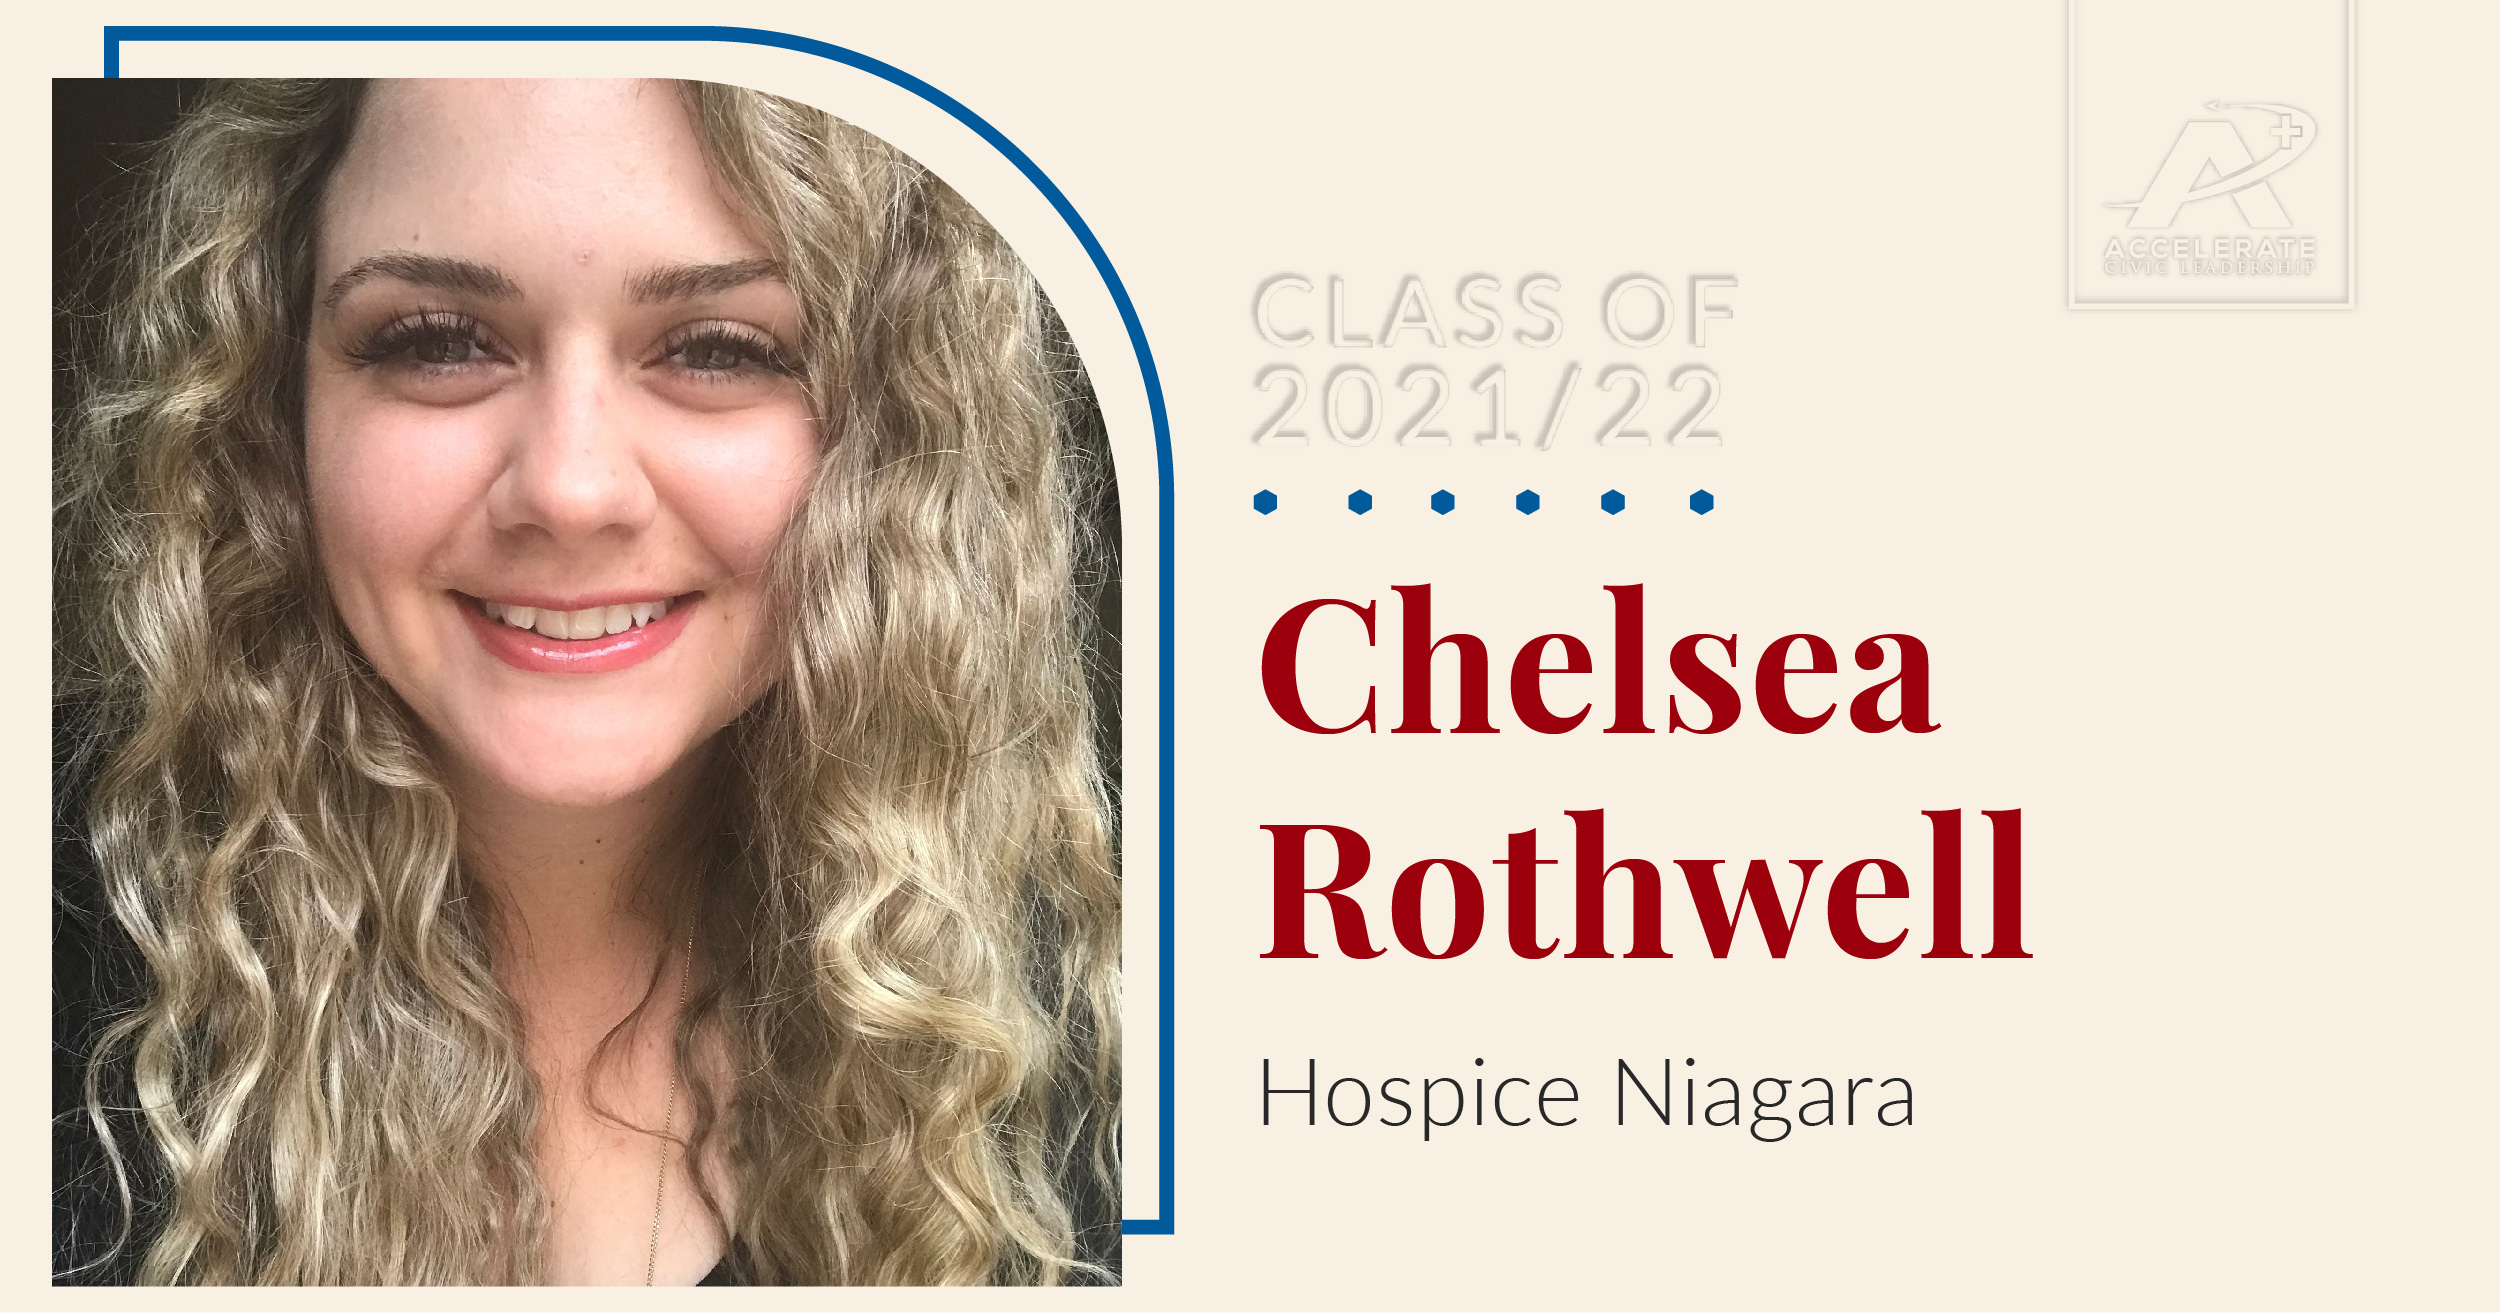 Leader spotlight for Chelsea Rothwell, Clinical Lead, Psychosocial and Bereavement Counselling Team - Hospice Niagara